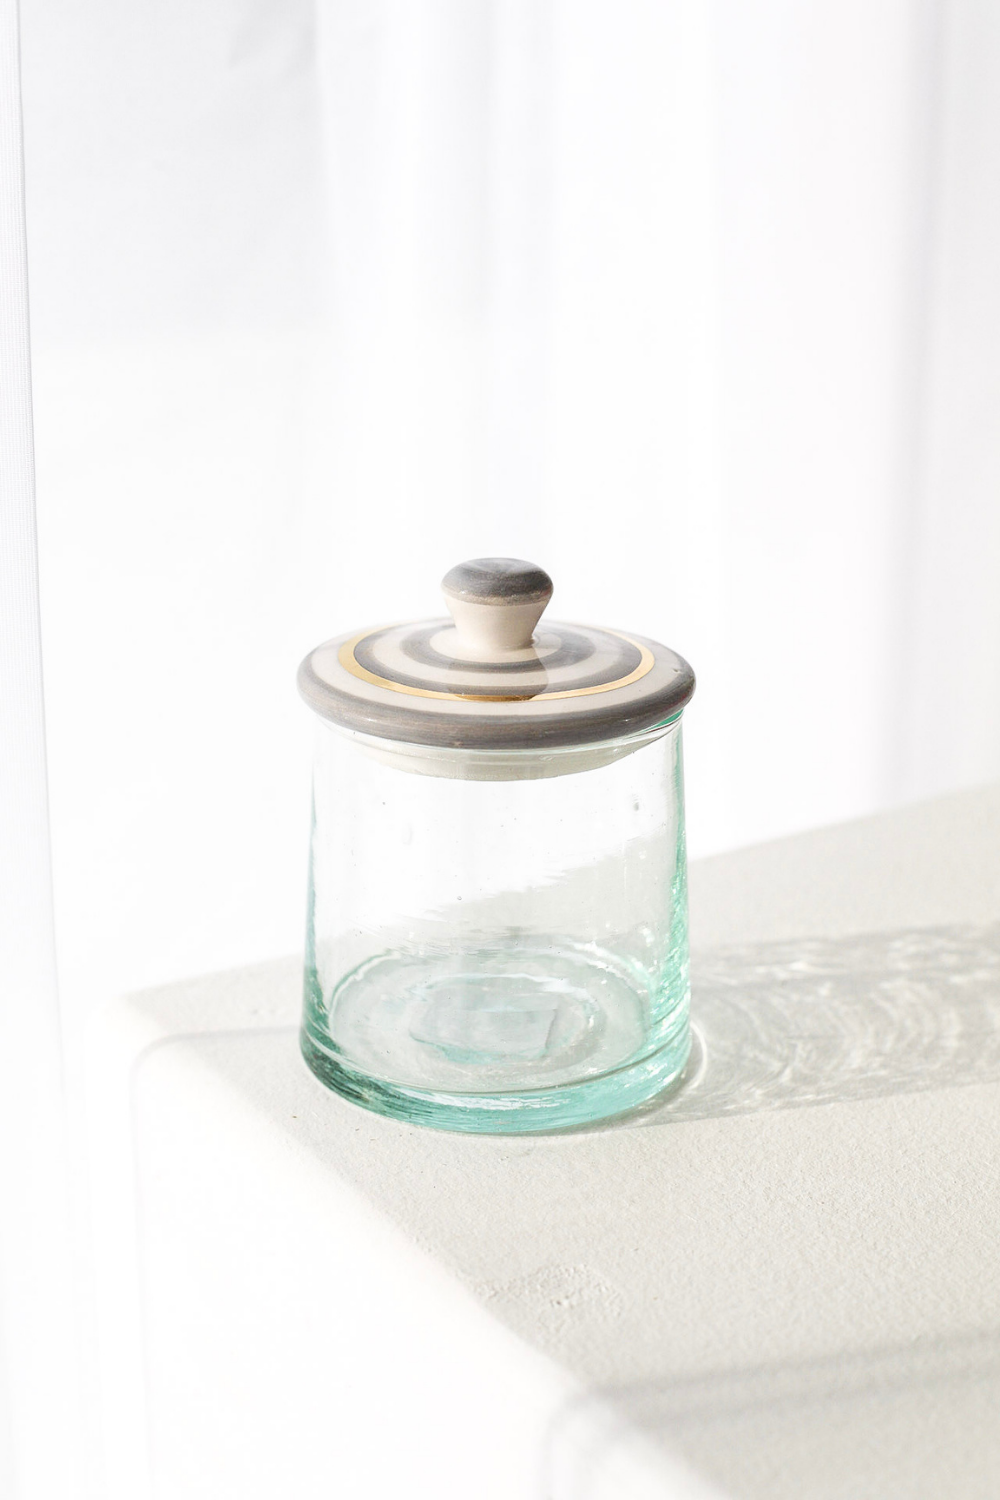 MARRAKECH ROUND GLASS BOX WITH CERAMIC LID STRIPED GREY - Luxe B Co